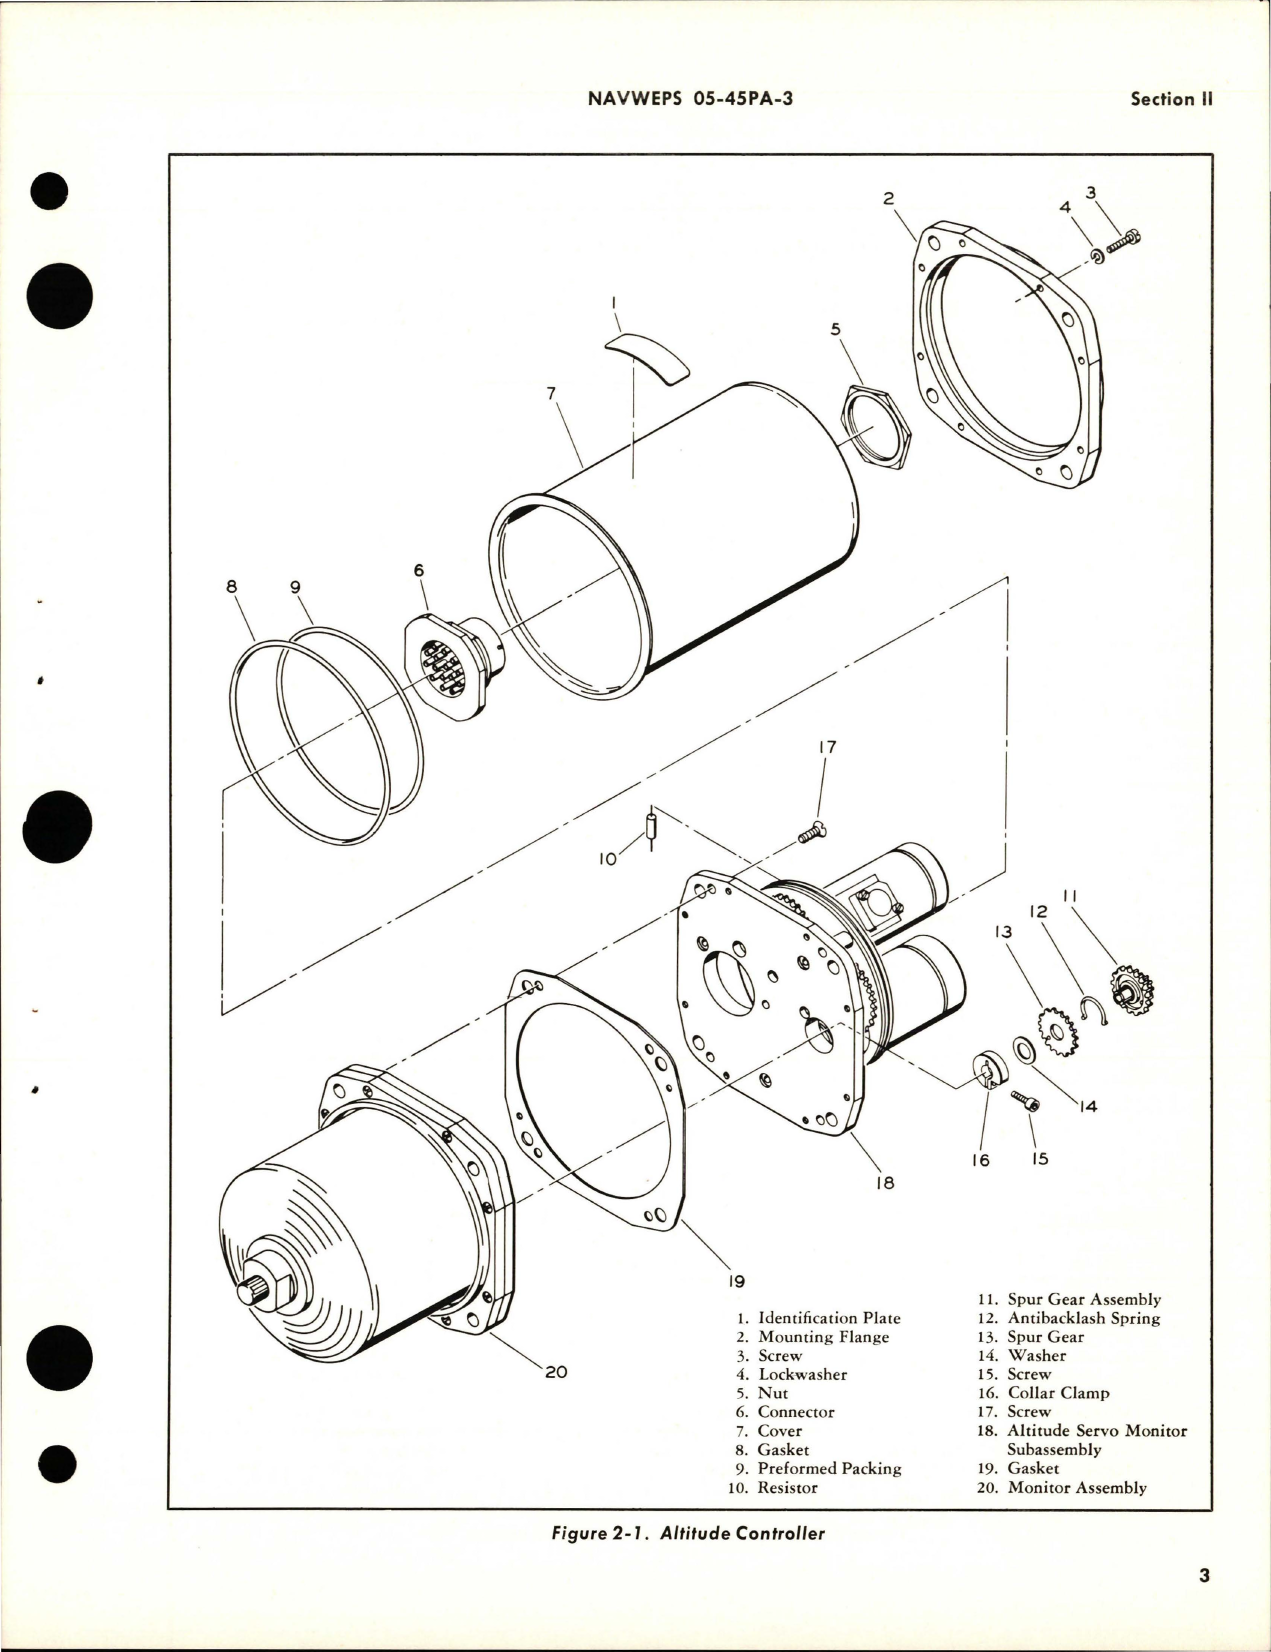 Sample page 7 from AirCorps Library document: Overhaul Instructions for Altitude Controller - Part B33601 00 001